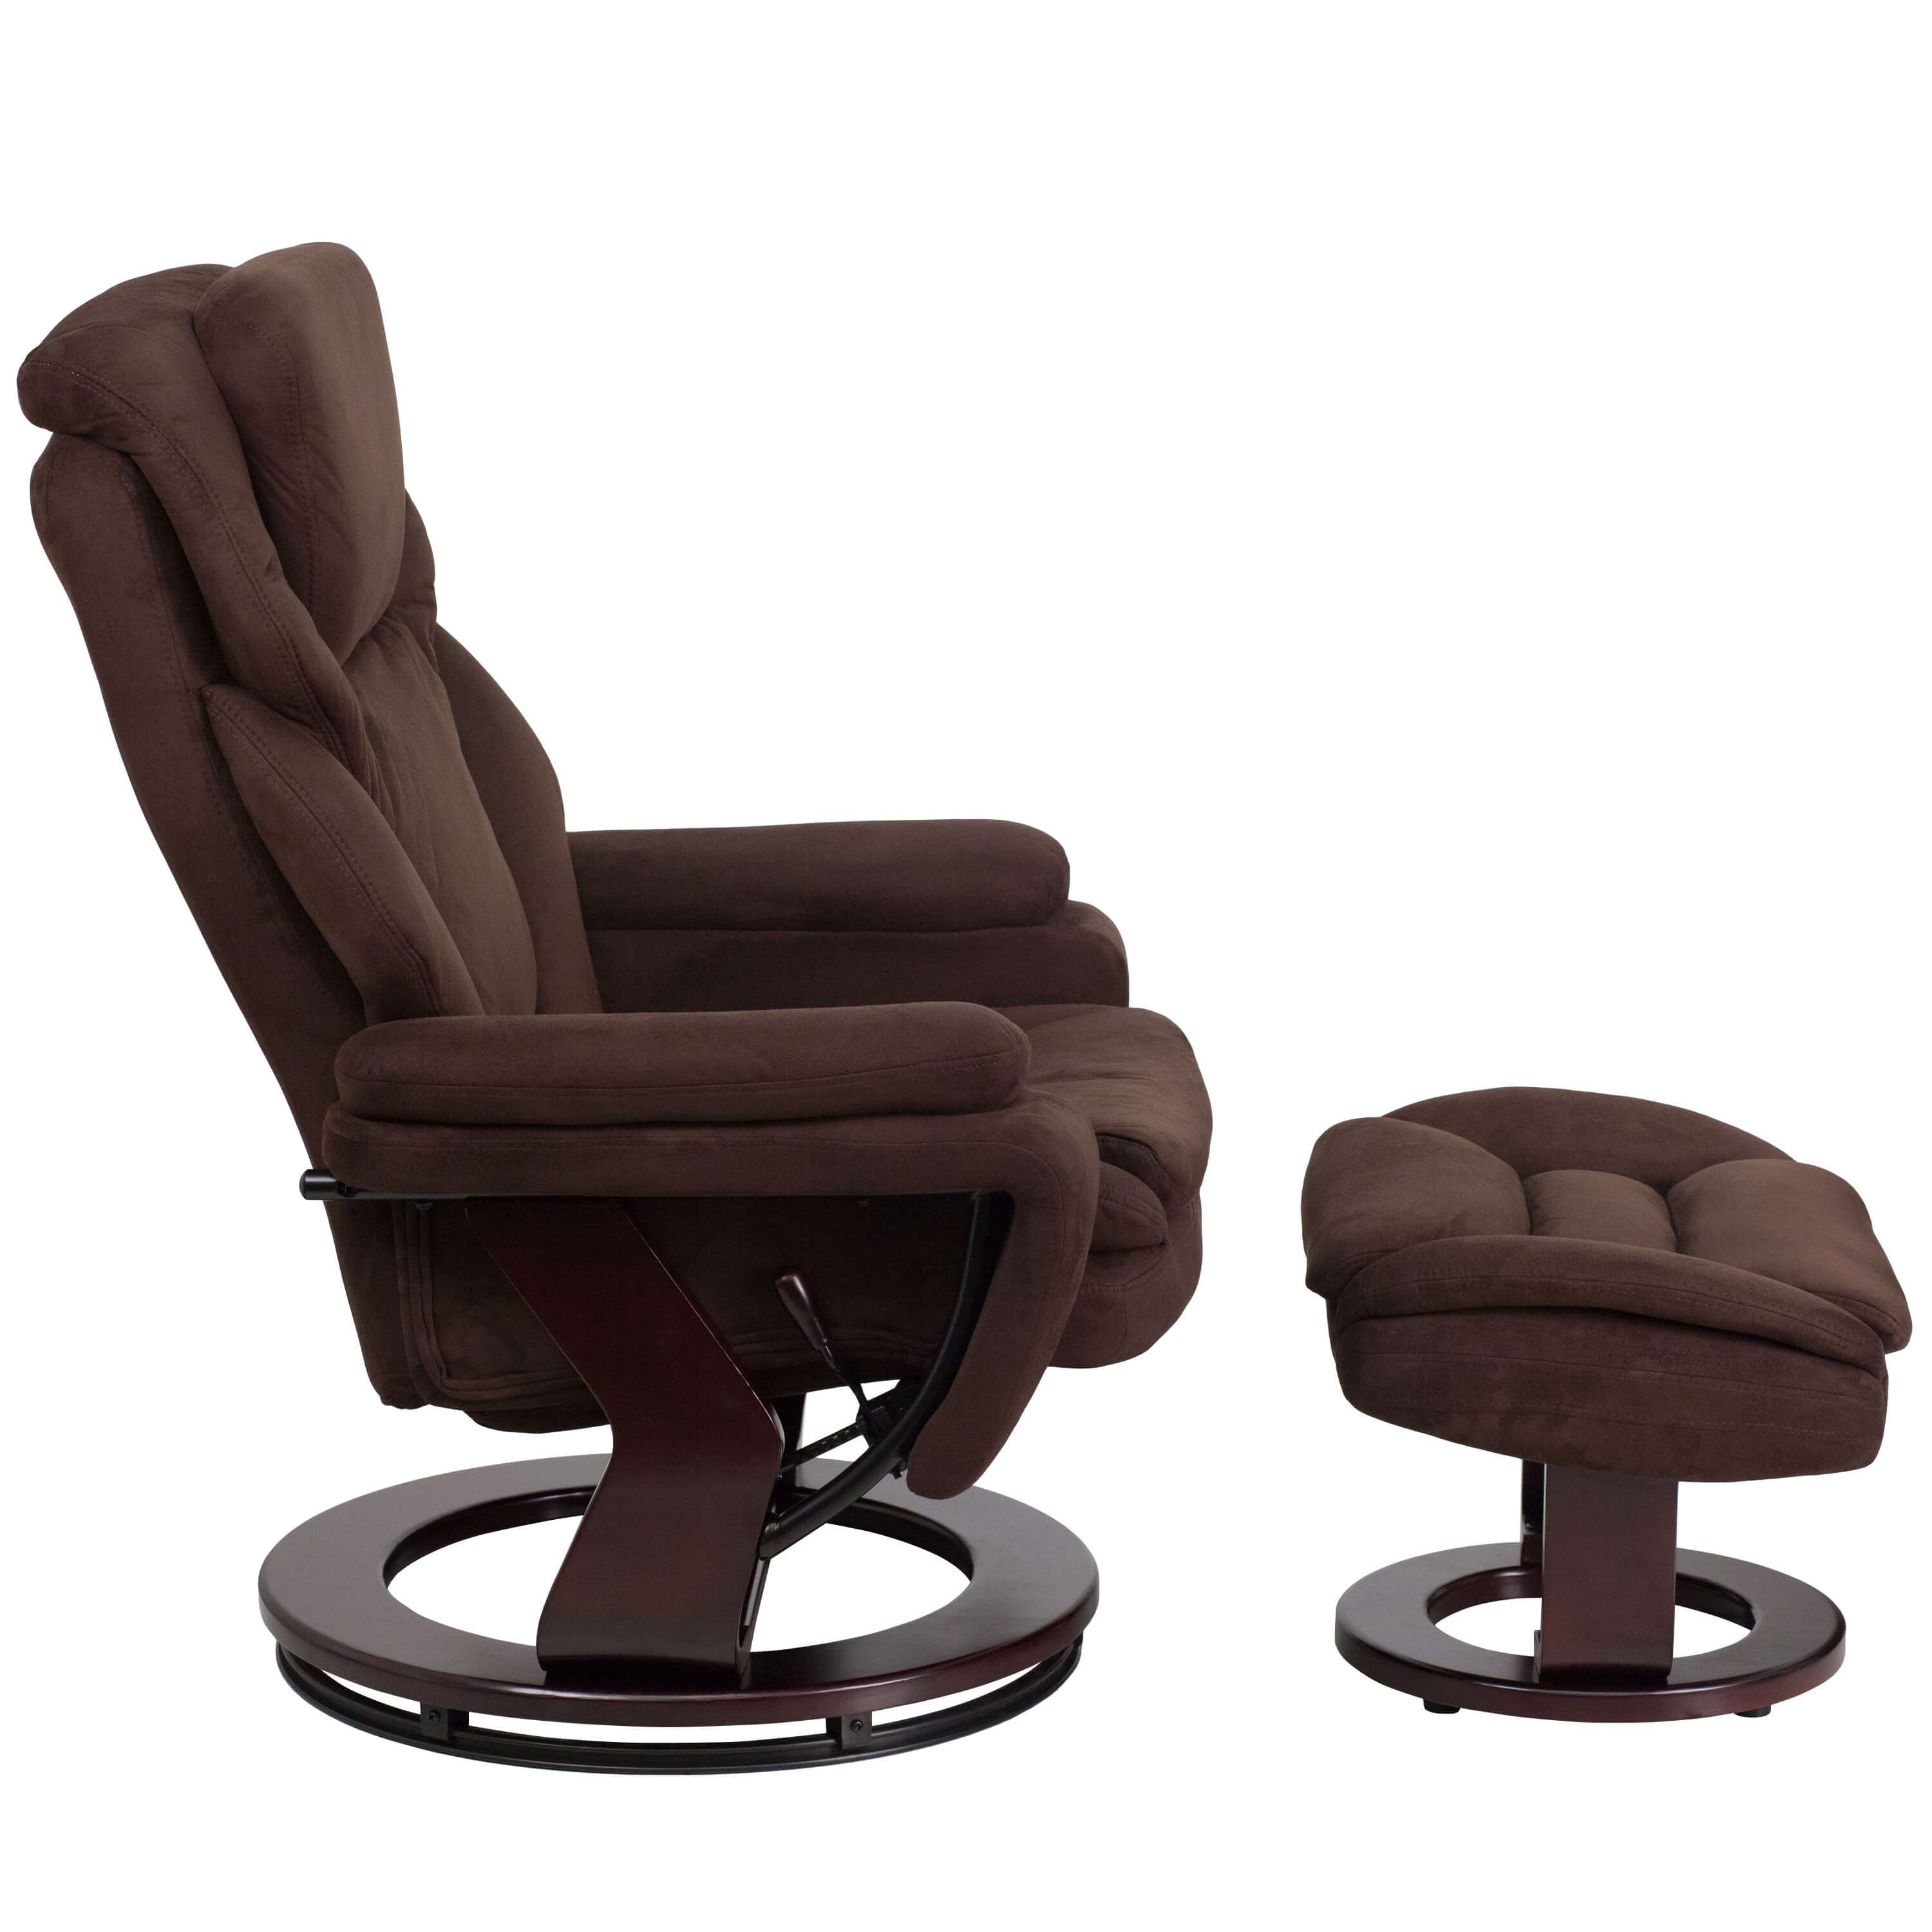 Brown recliner side view